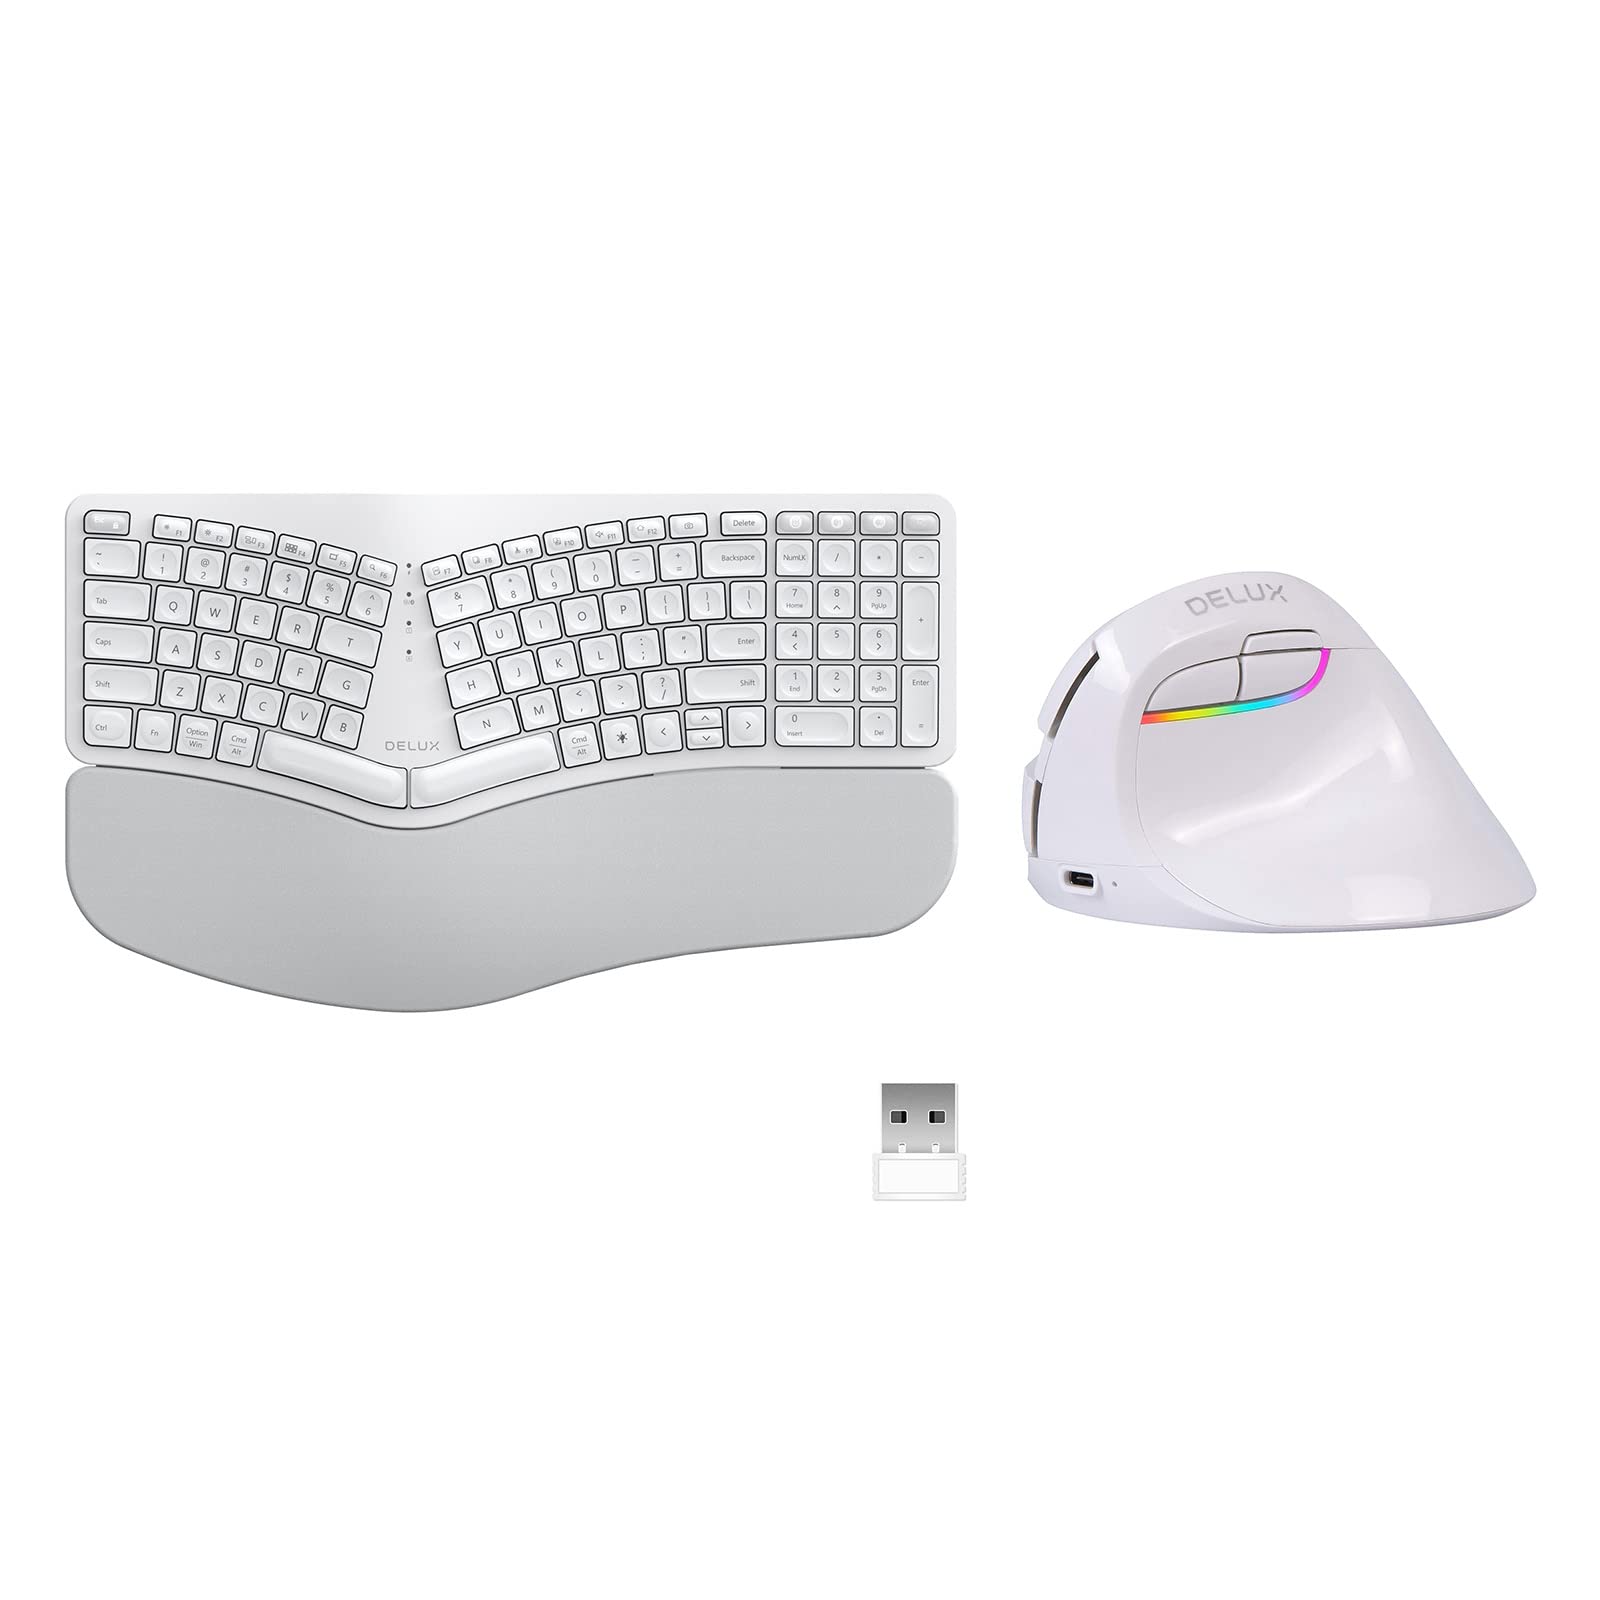 DELUX Wireless Ergonomic Keyboard Mouse Combo, Split Ergo Keyboard with Backlit GM902Pro and Vertical Mouse M618mini-White